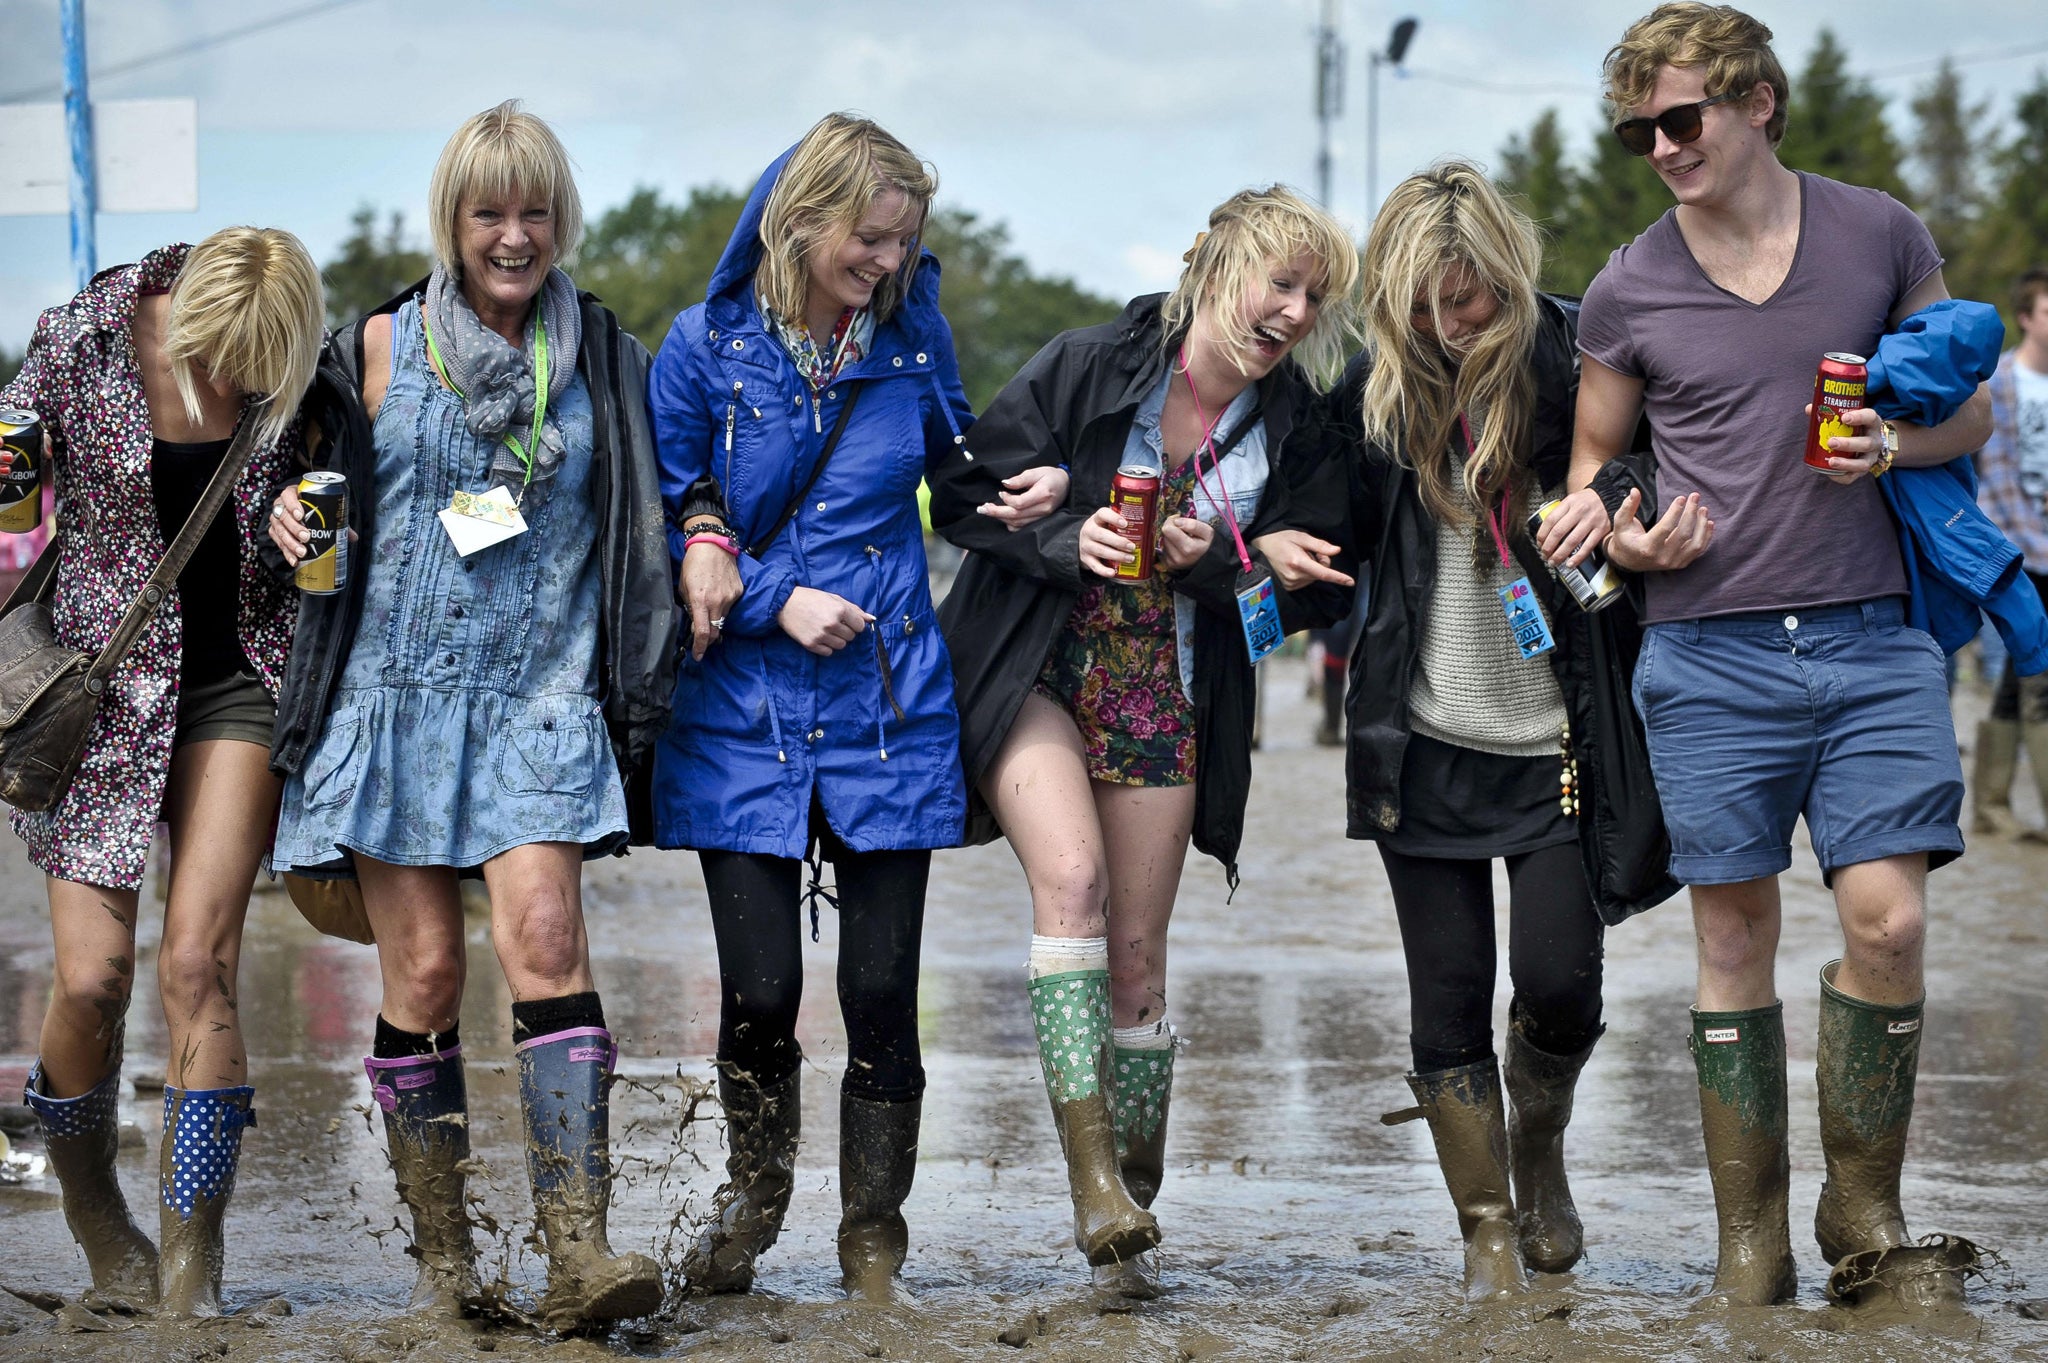 Friends from Torquay splash in the mud at the Glastonbury 2011